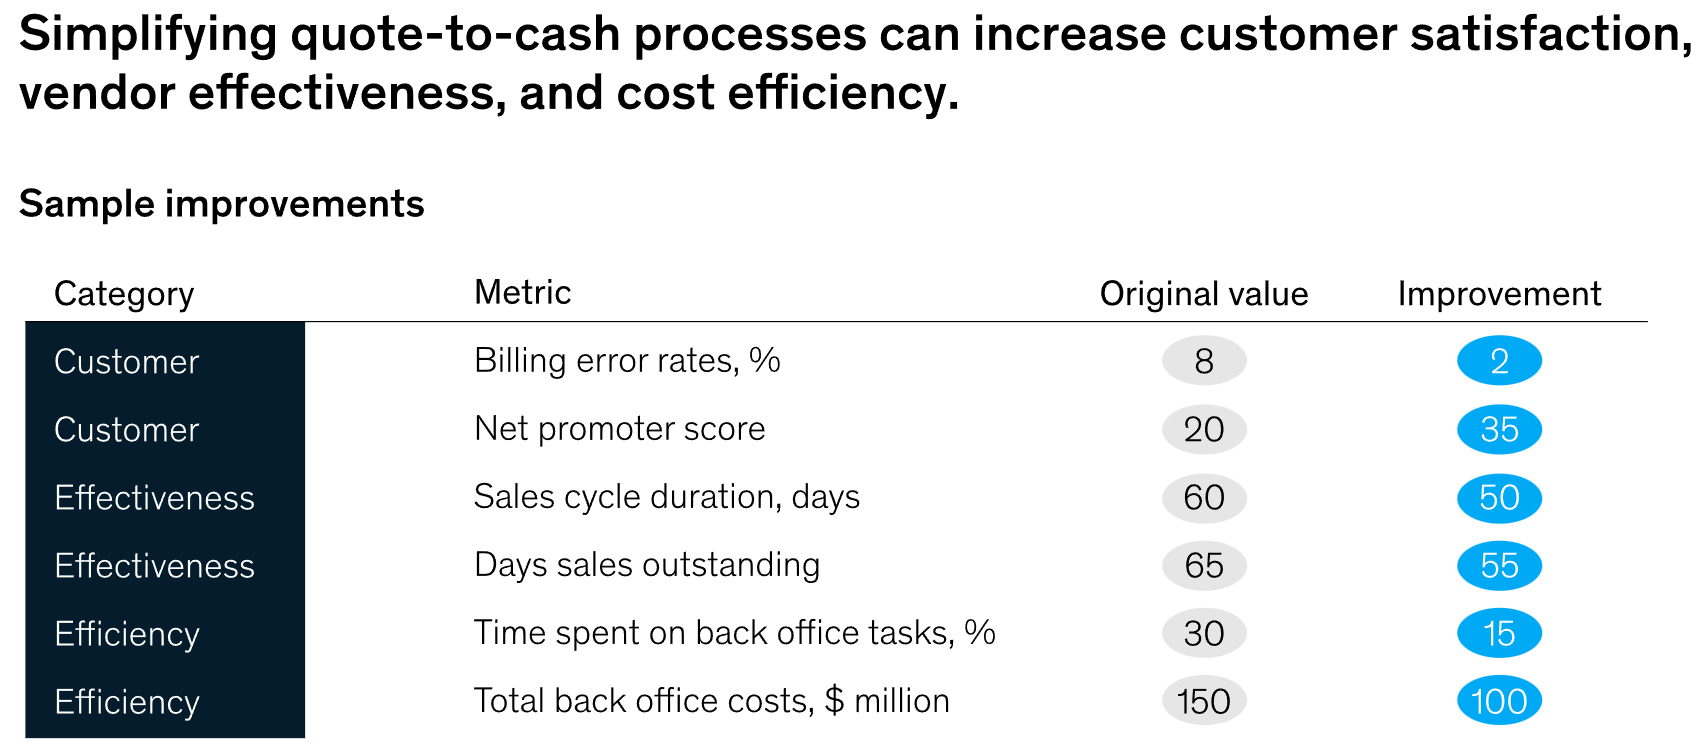 Simplifying quote-to-cash processes can increase customer satisfaction, vendor effectiveness, and cost efficiency